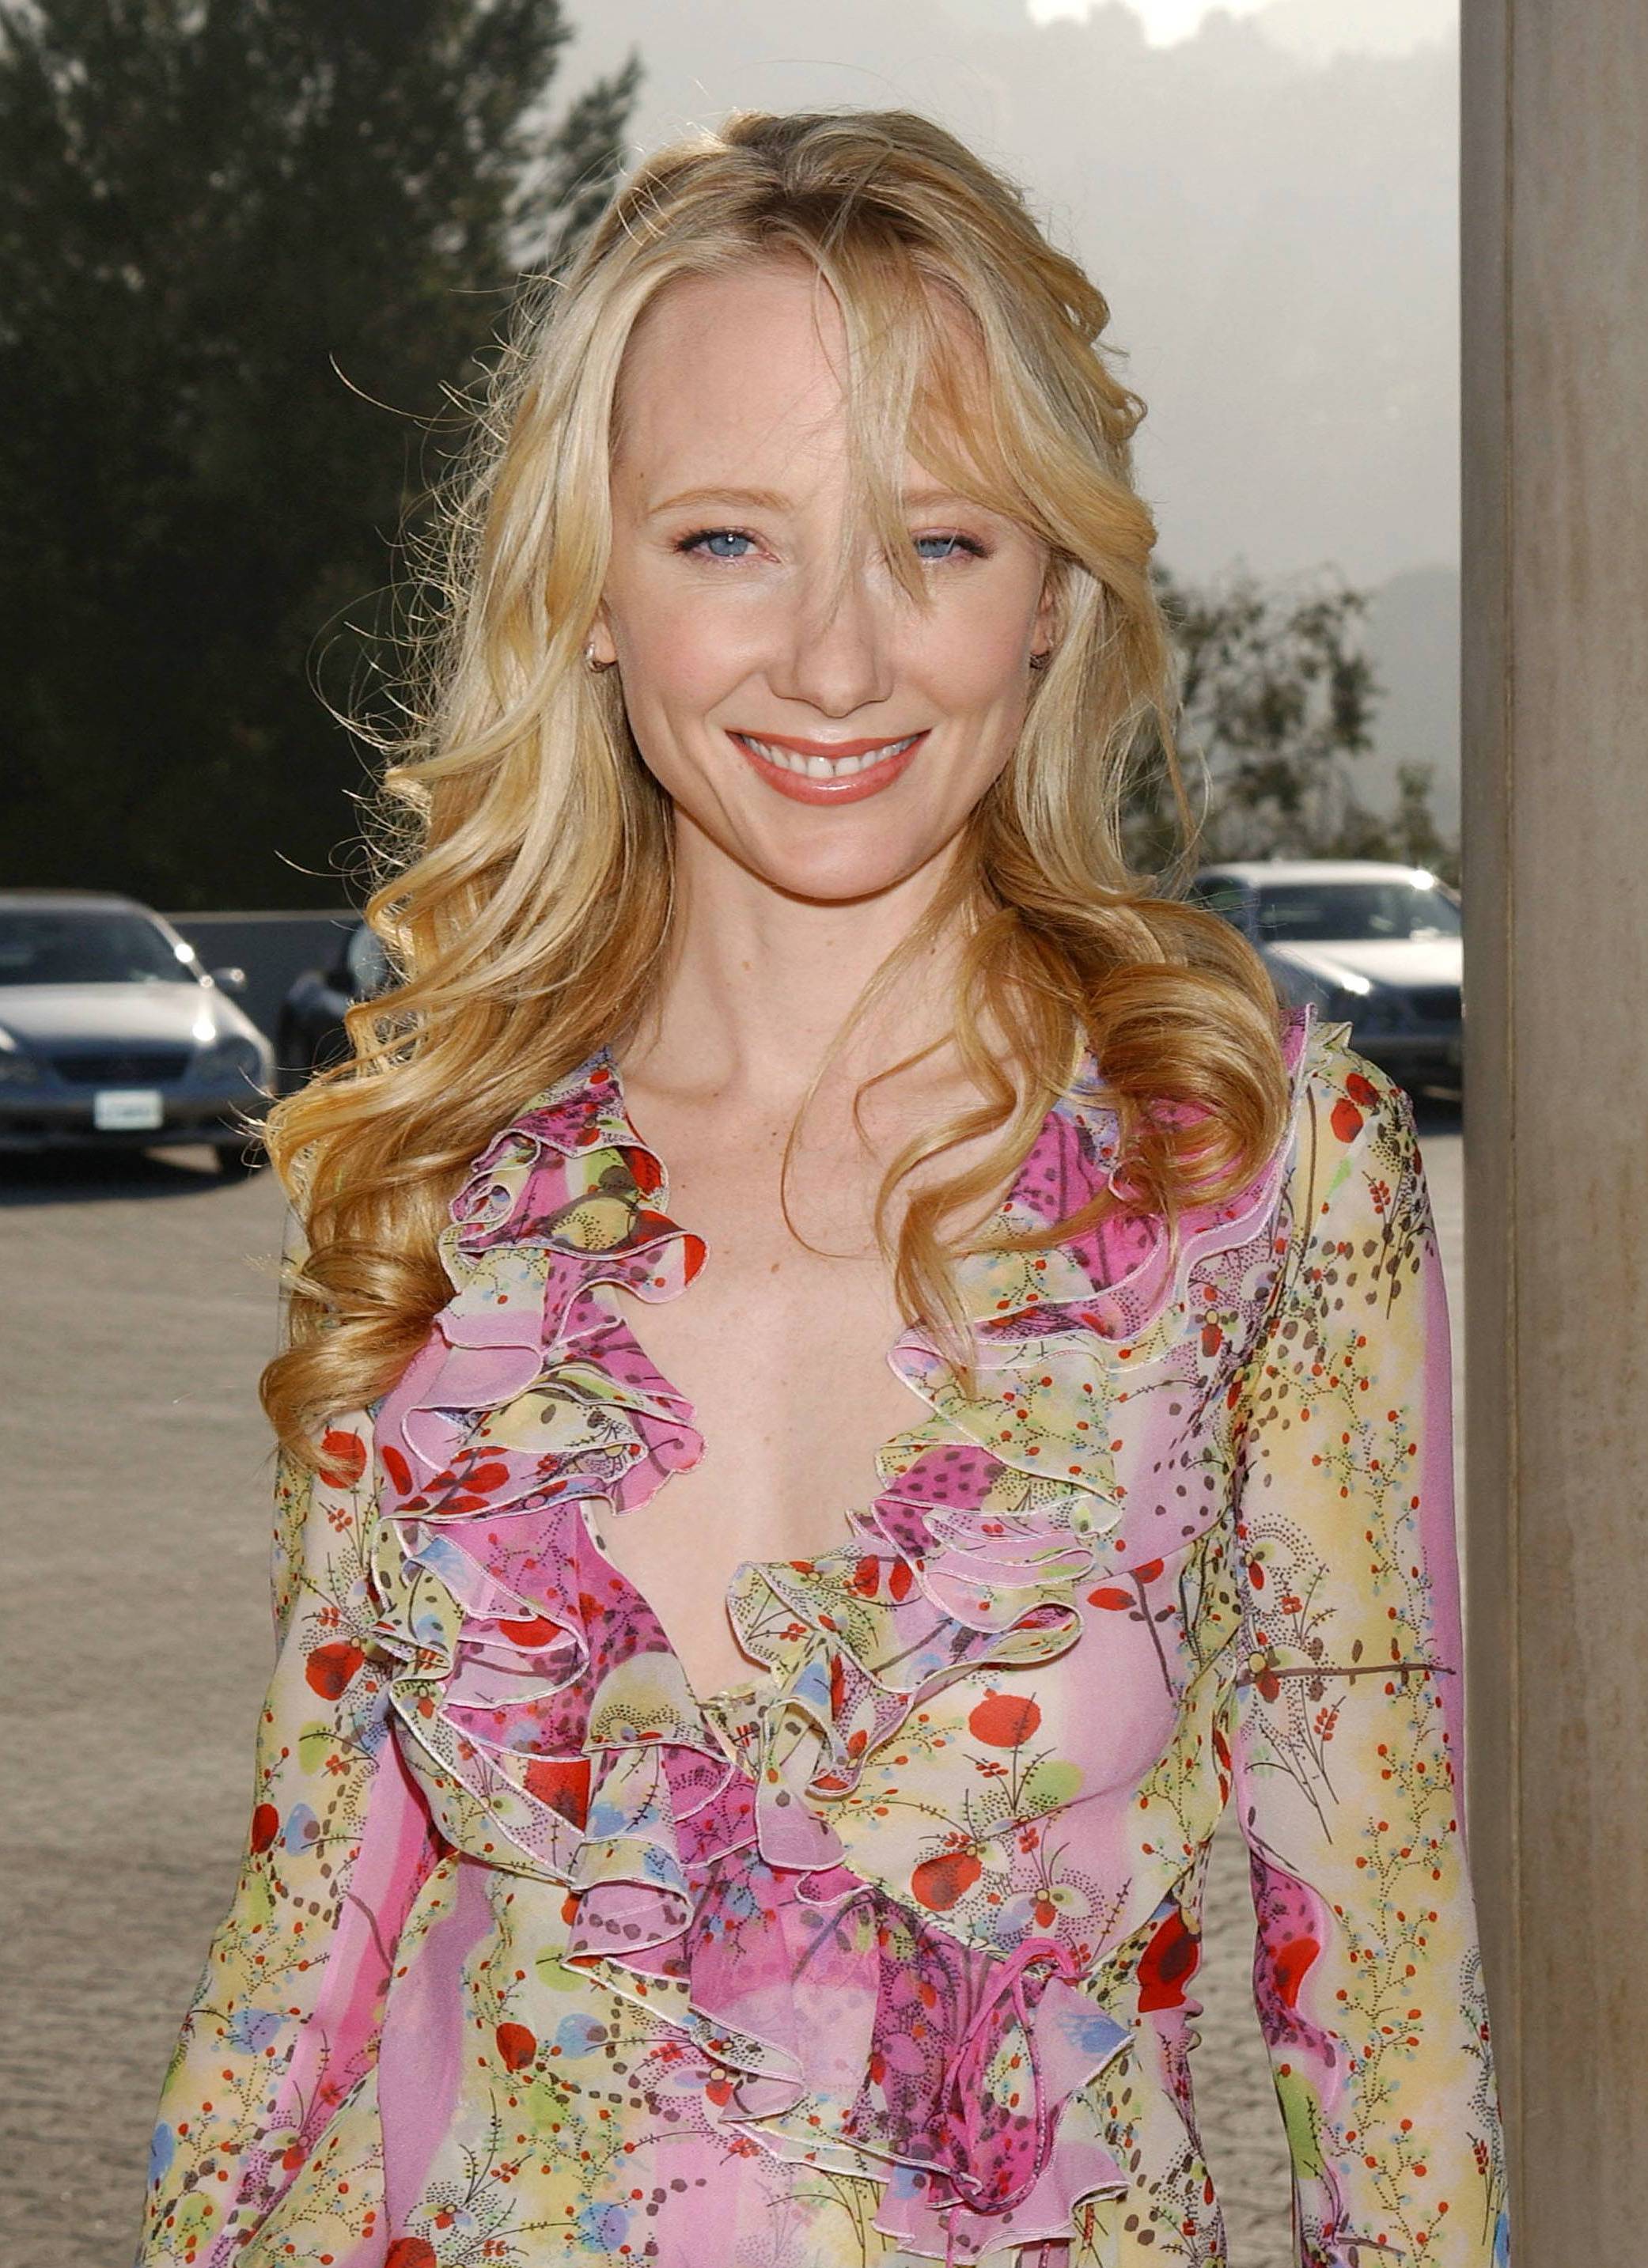 Anne Heche photo 35 of 120 pics, wallpaper - photo #234231 - ThePlace2